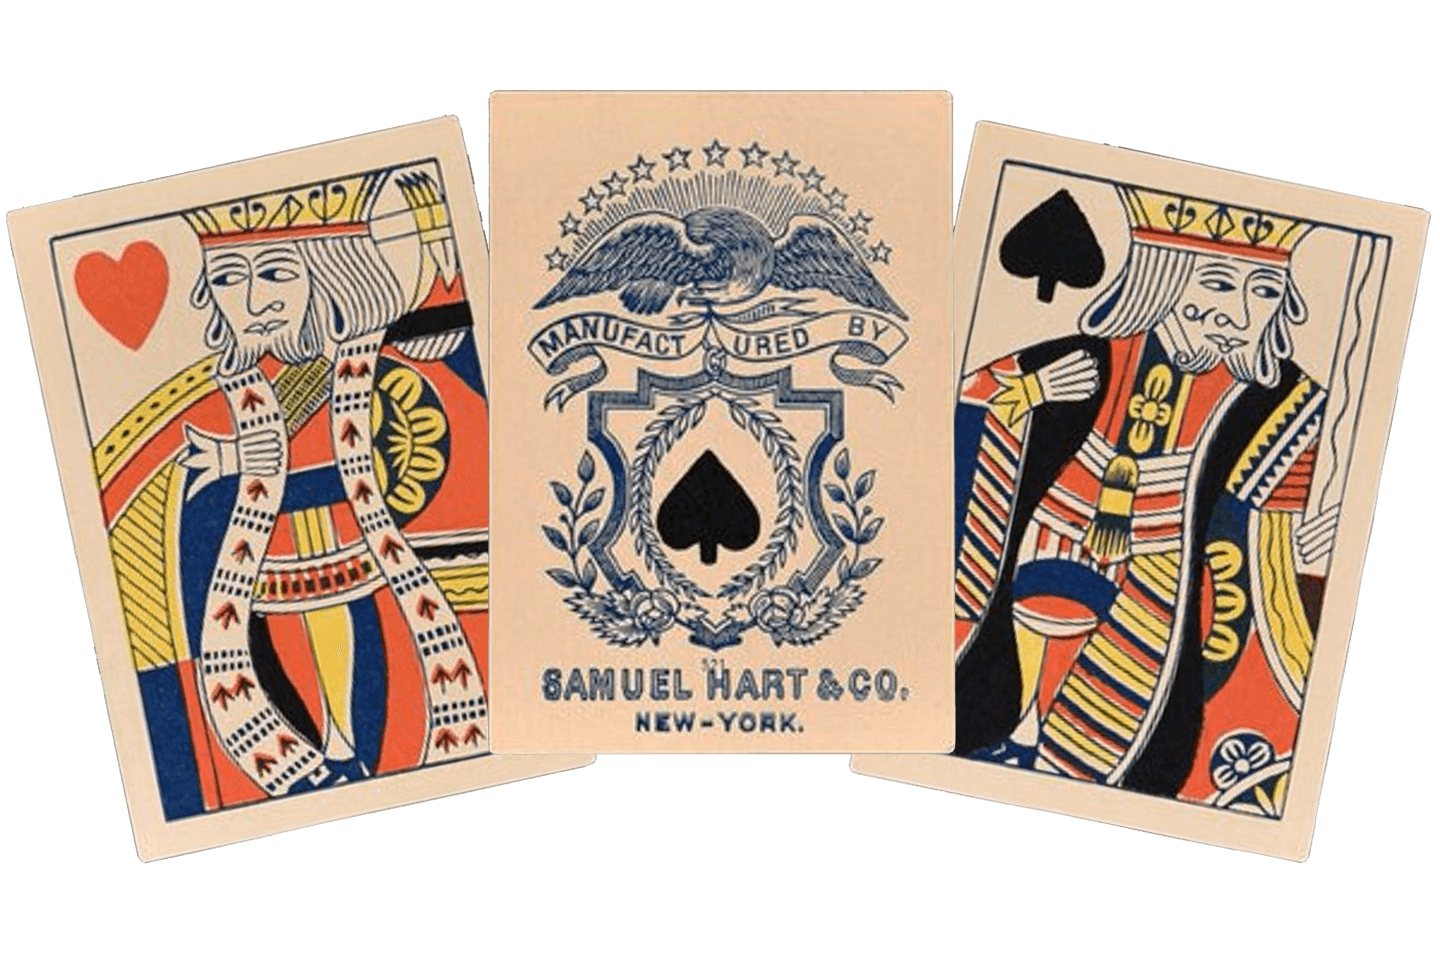 These amazing playing cards serve as cherished relics, evoking the spirit of the wild West that once defined America's adventurous past.